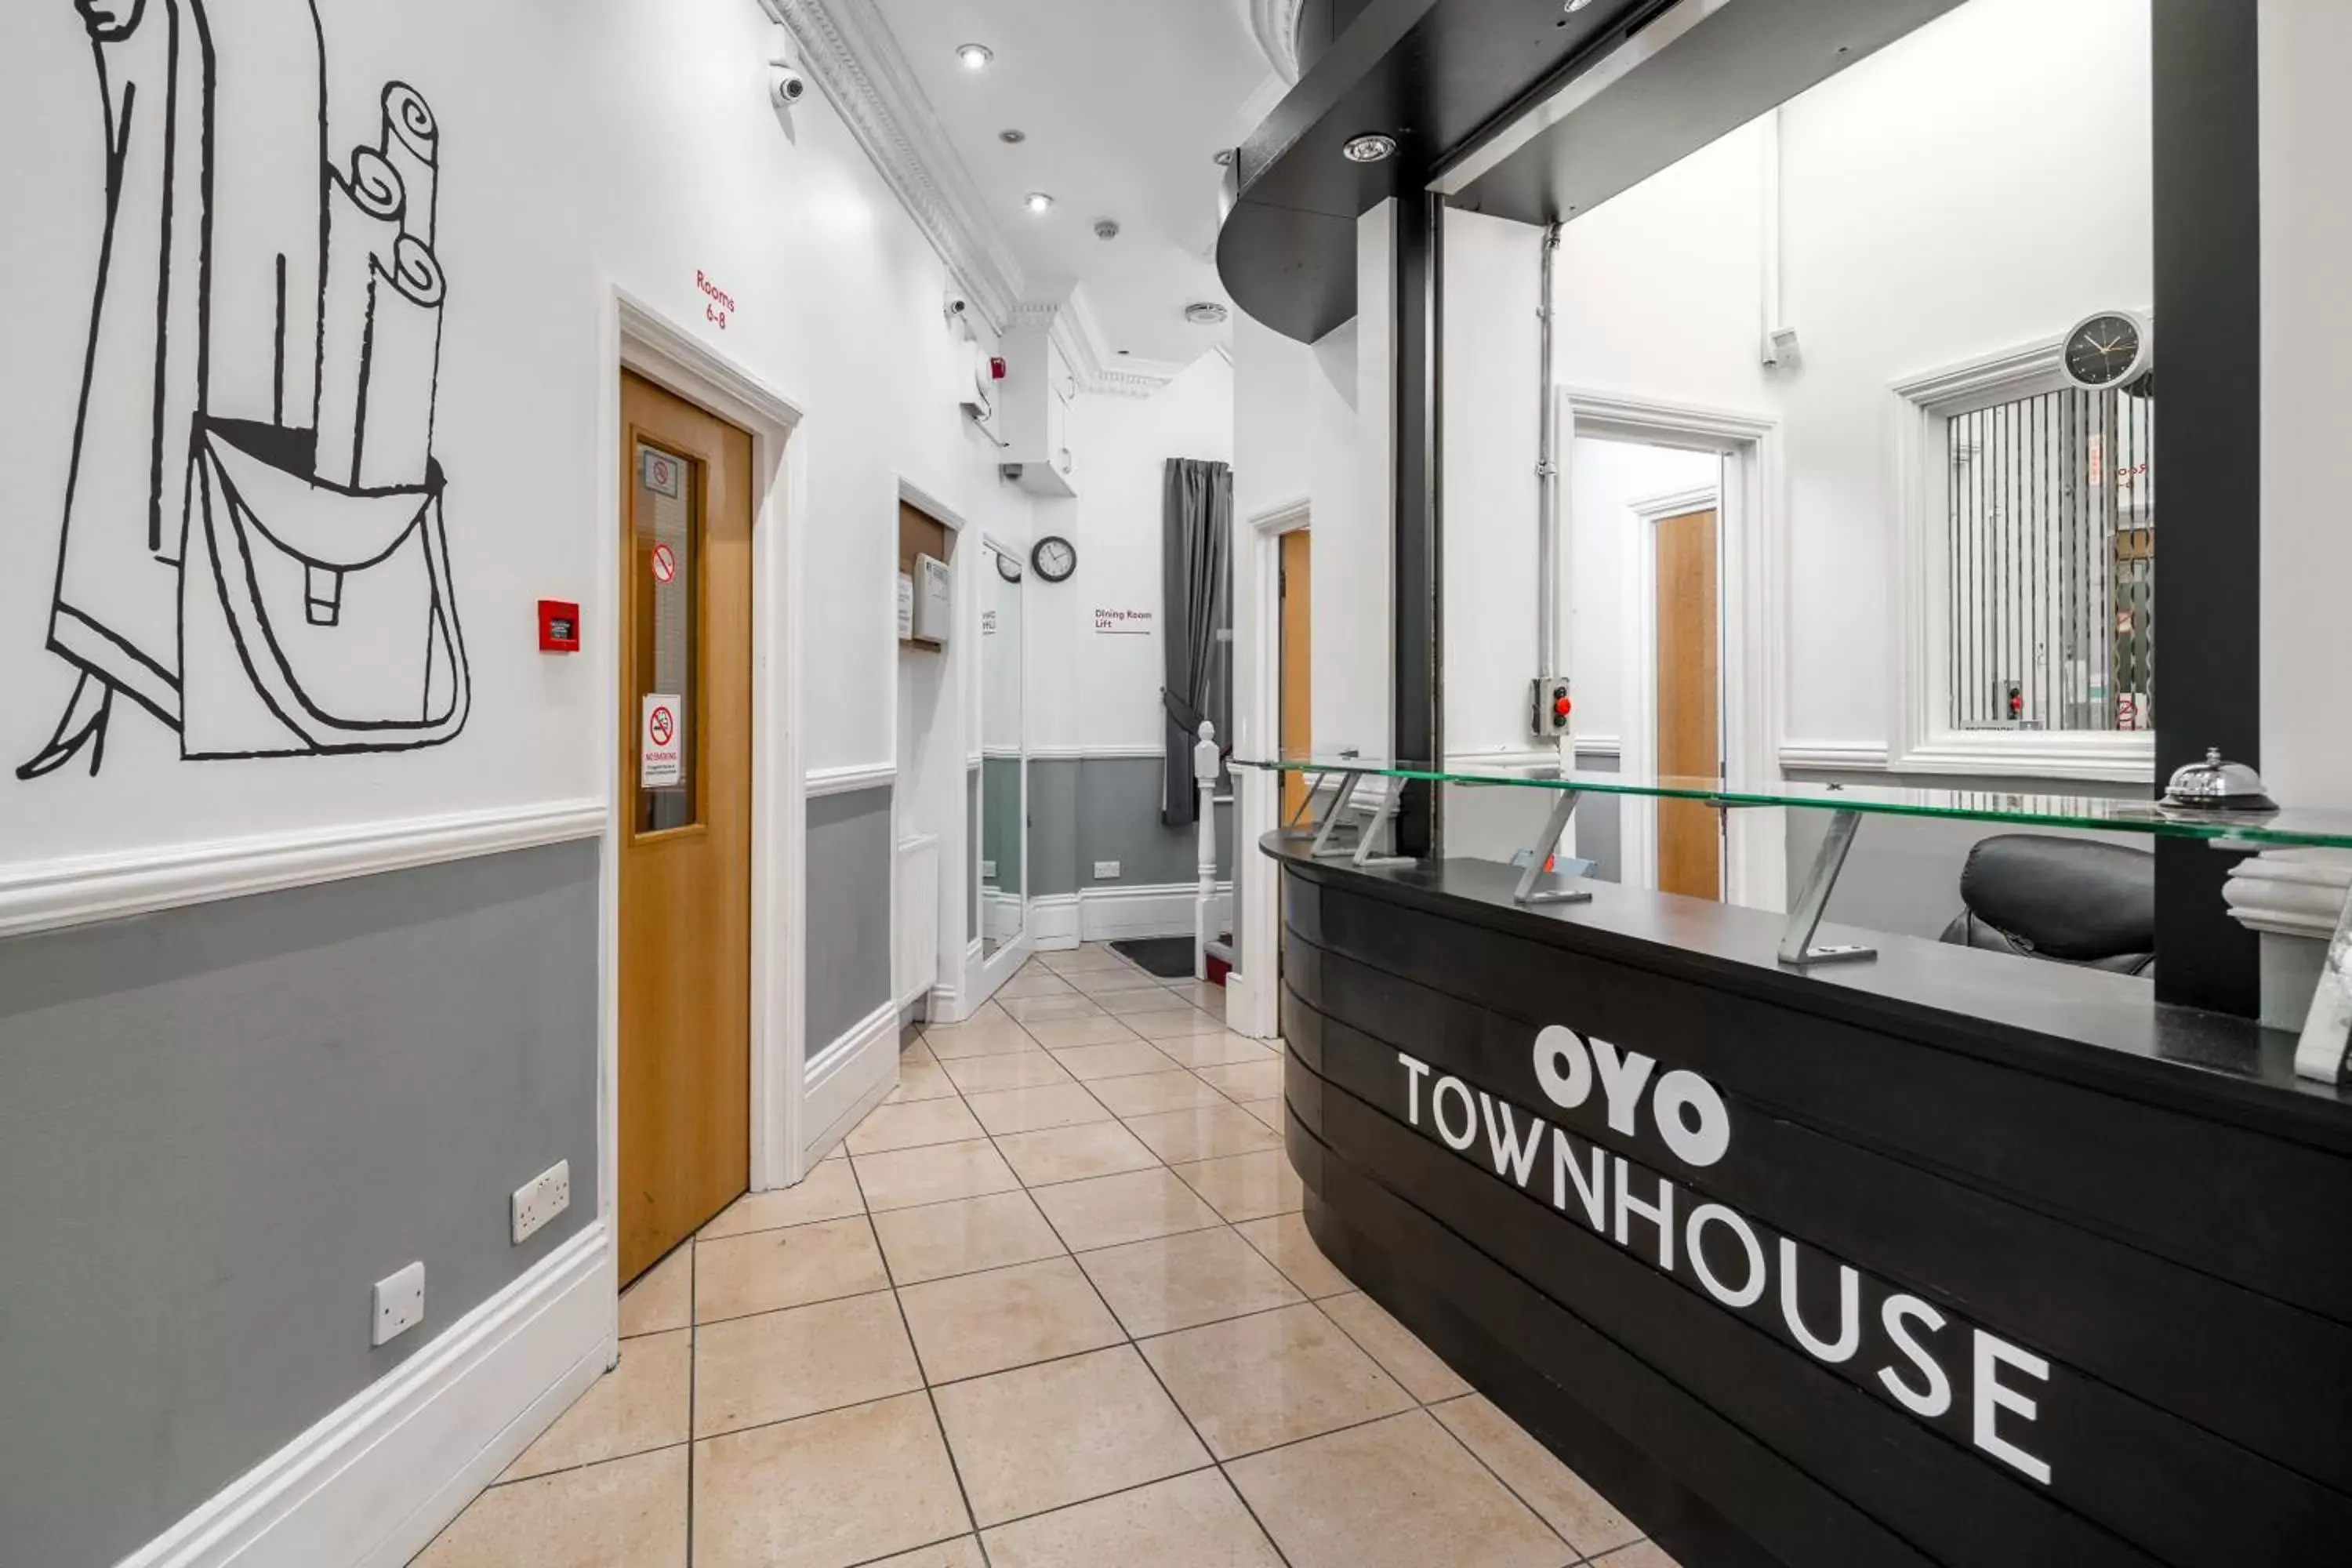 Lobby or reception in OYO Townhouse New England, London Victoria